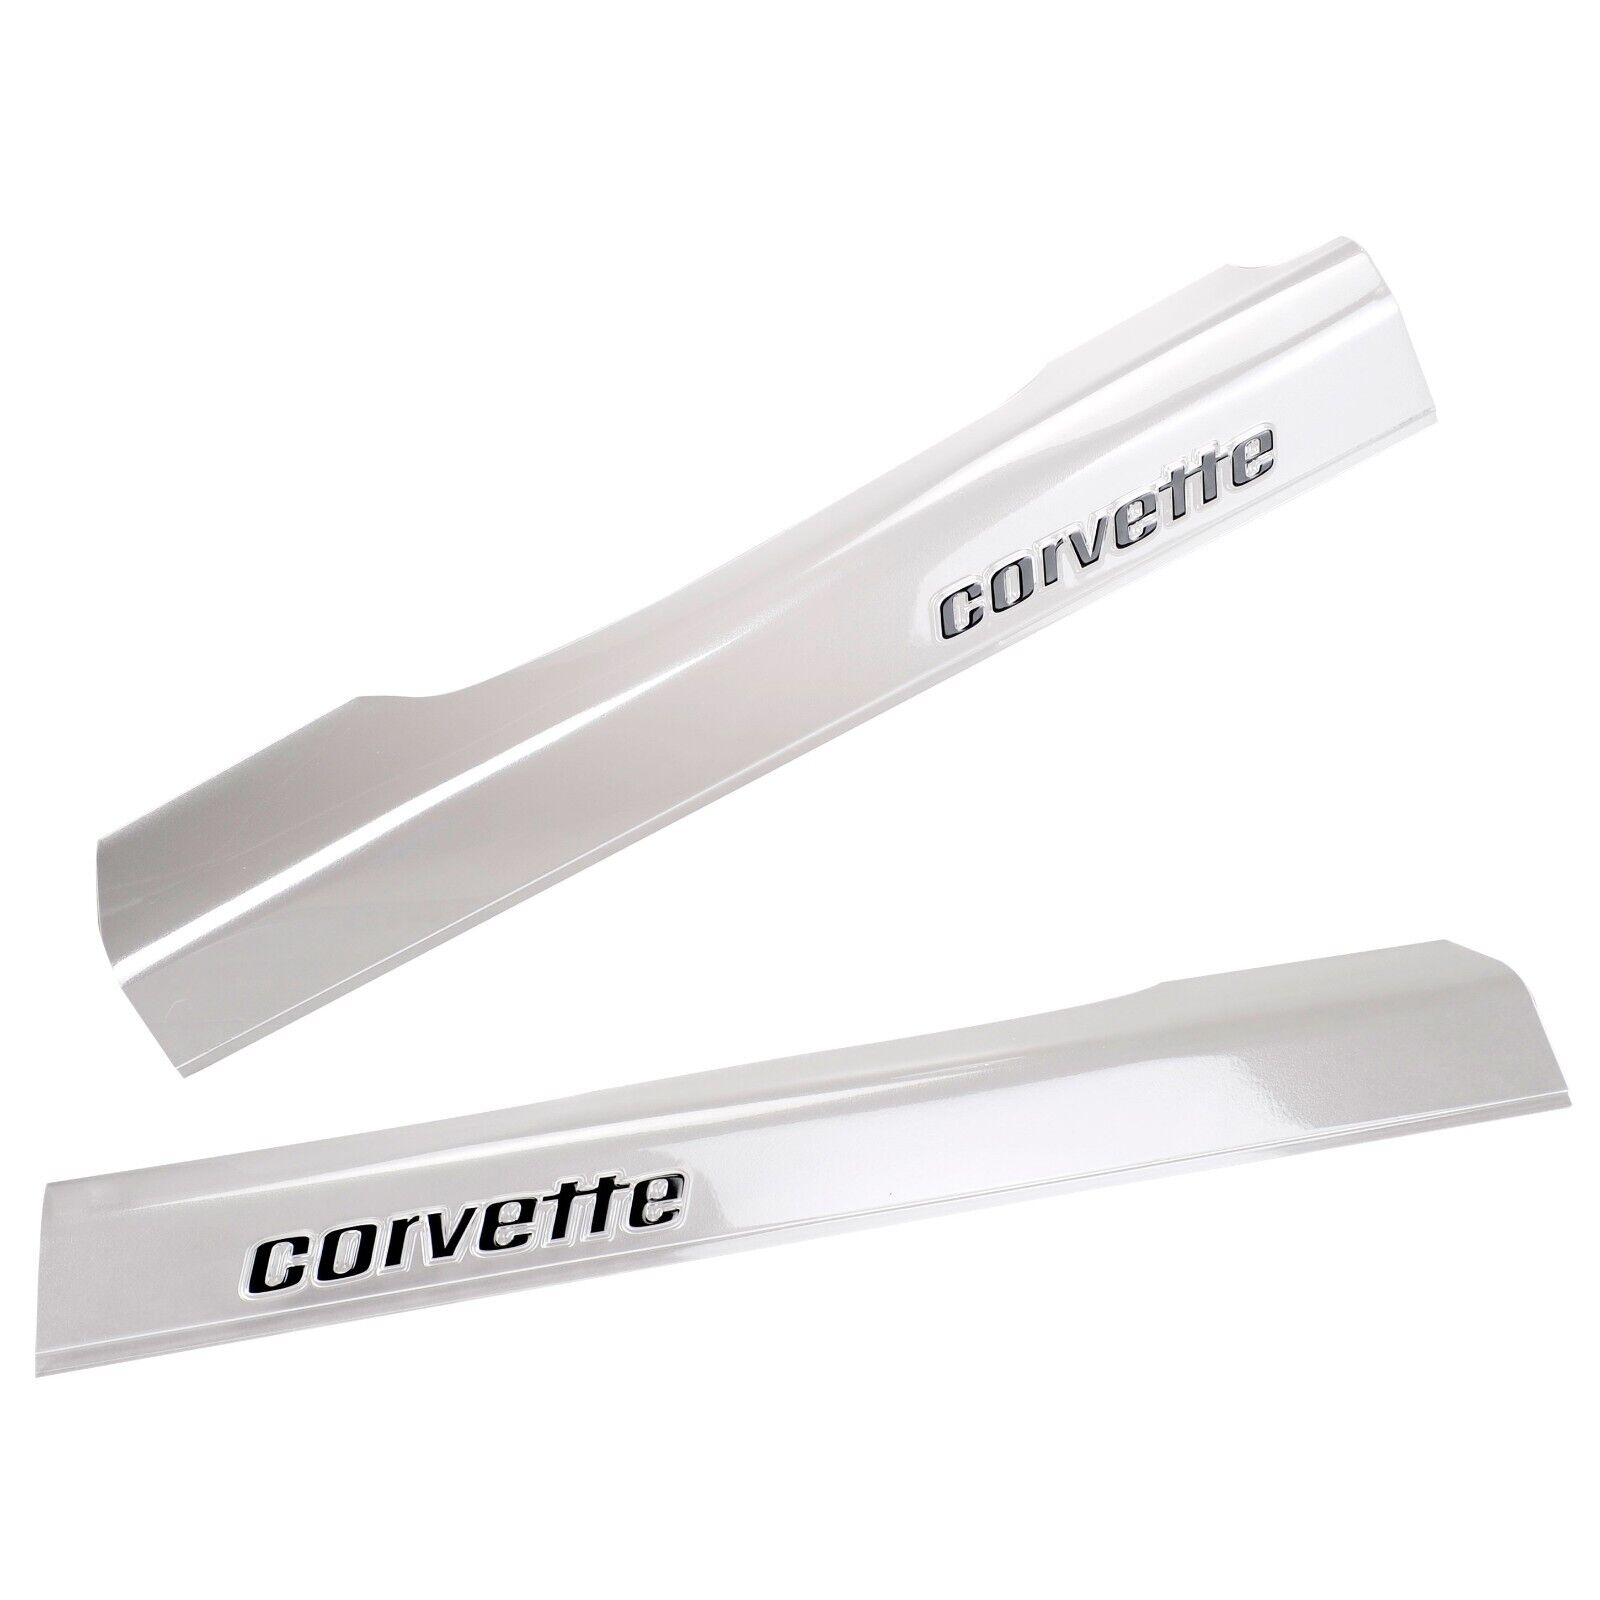 2pc OEM GM Corvette Clear Door Sill Guards / Protectors with Logo for 1978-82 C3